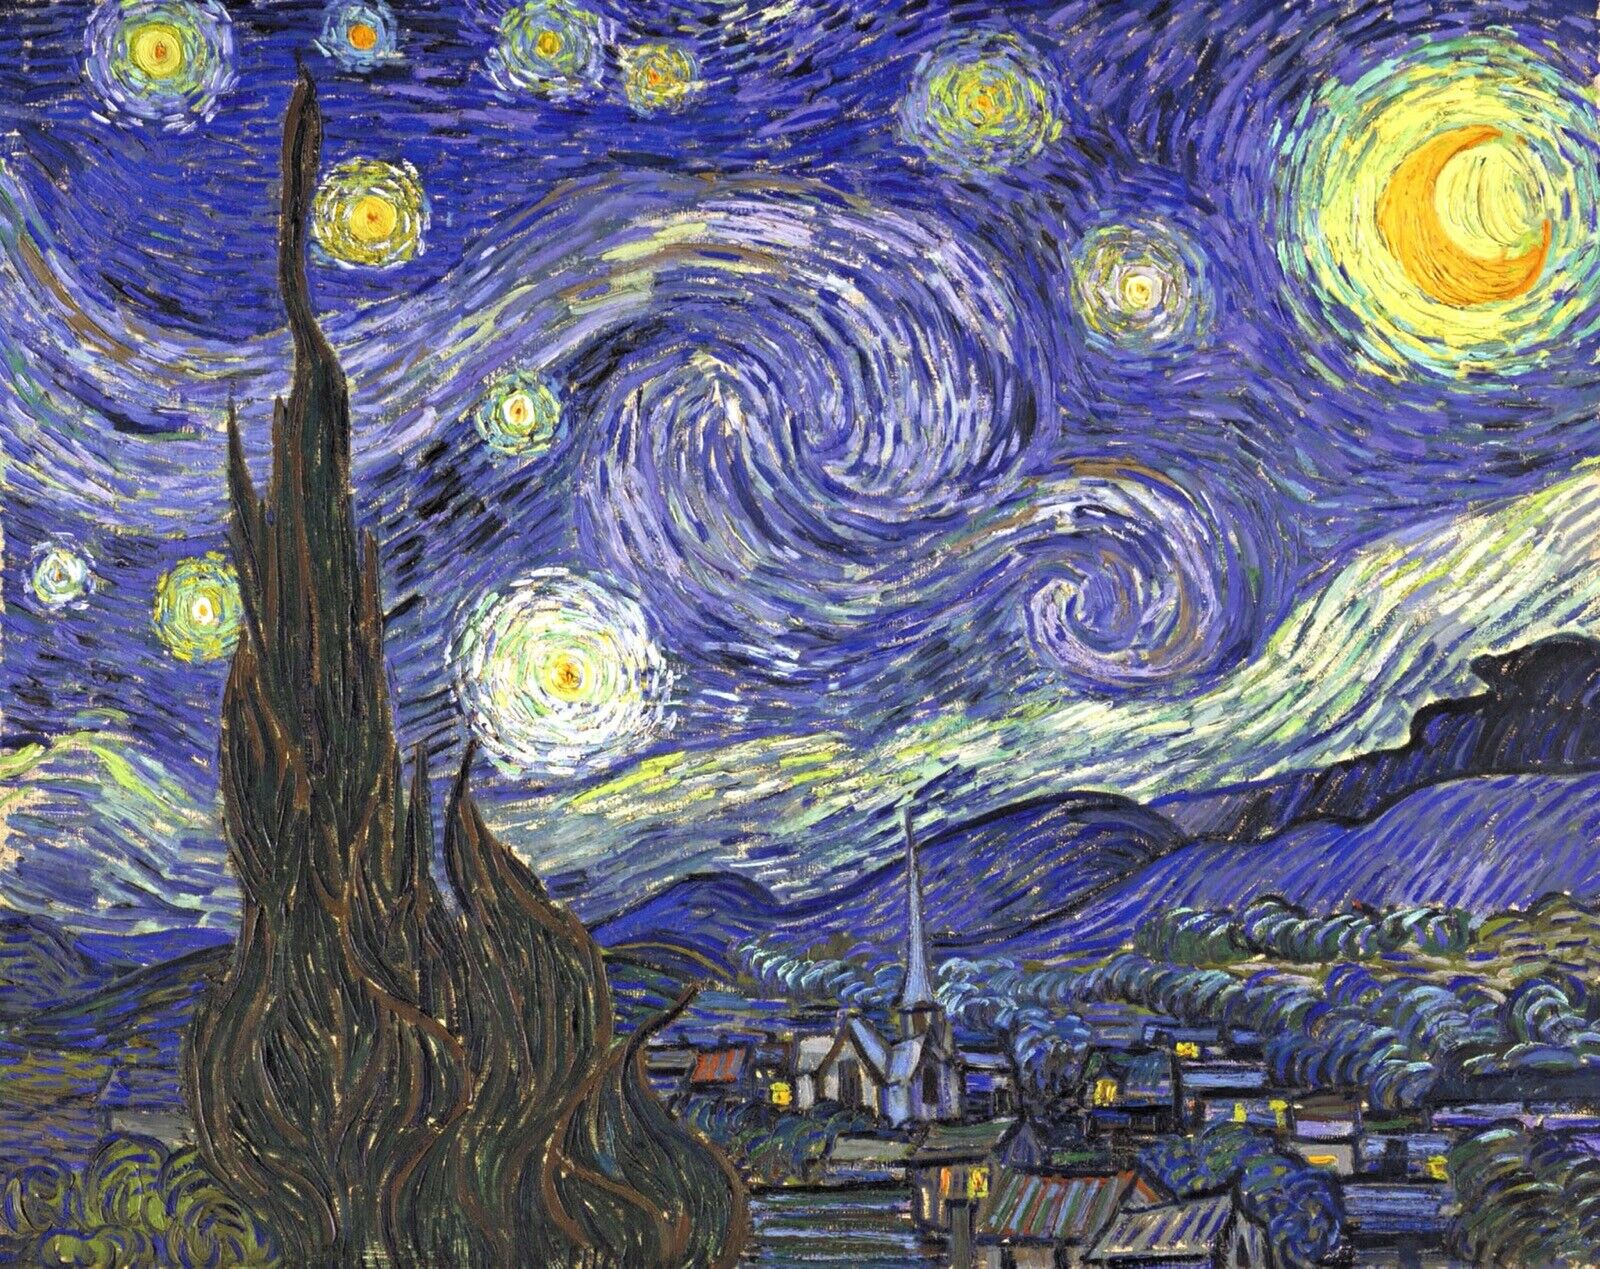 Starry Night by Vincent Van Gogh Giclee Fine Art Print Reproduction on Canvas